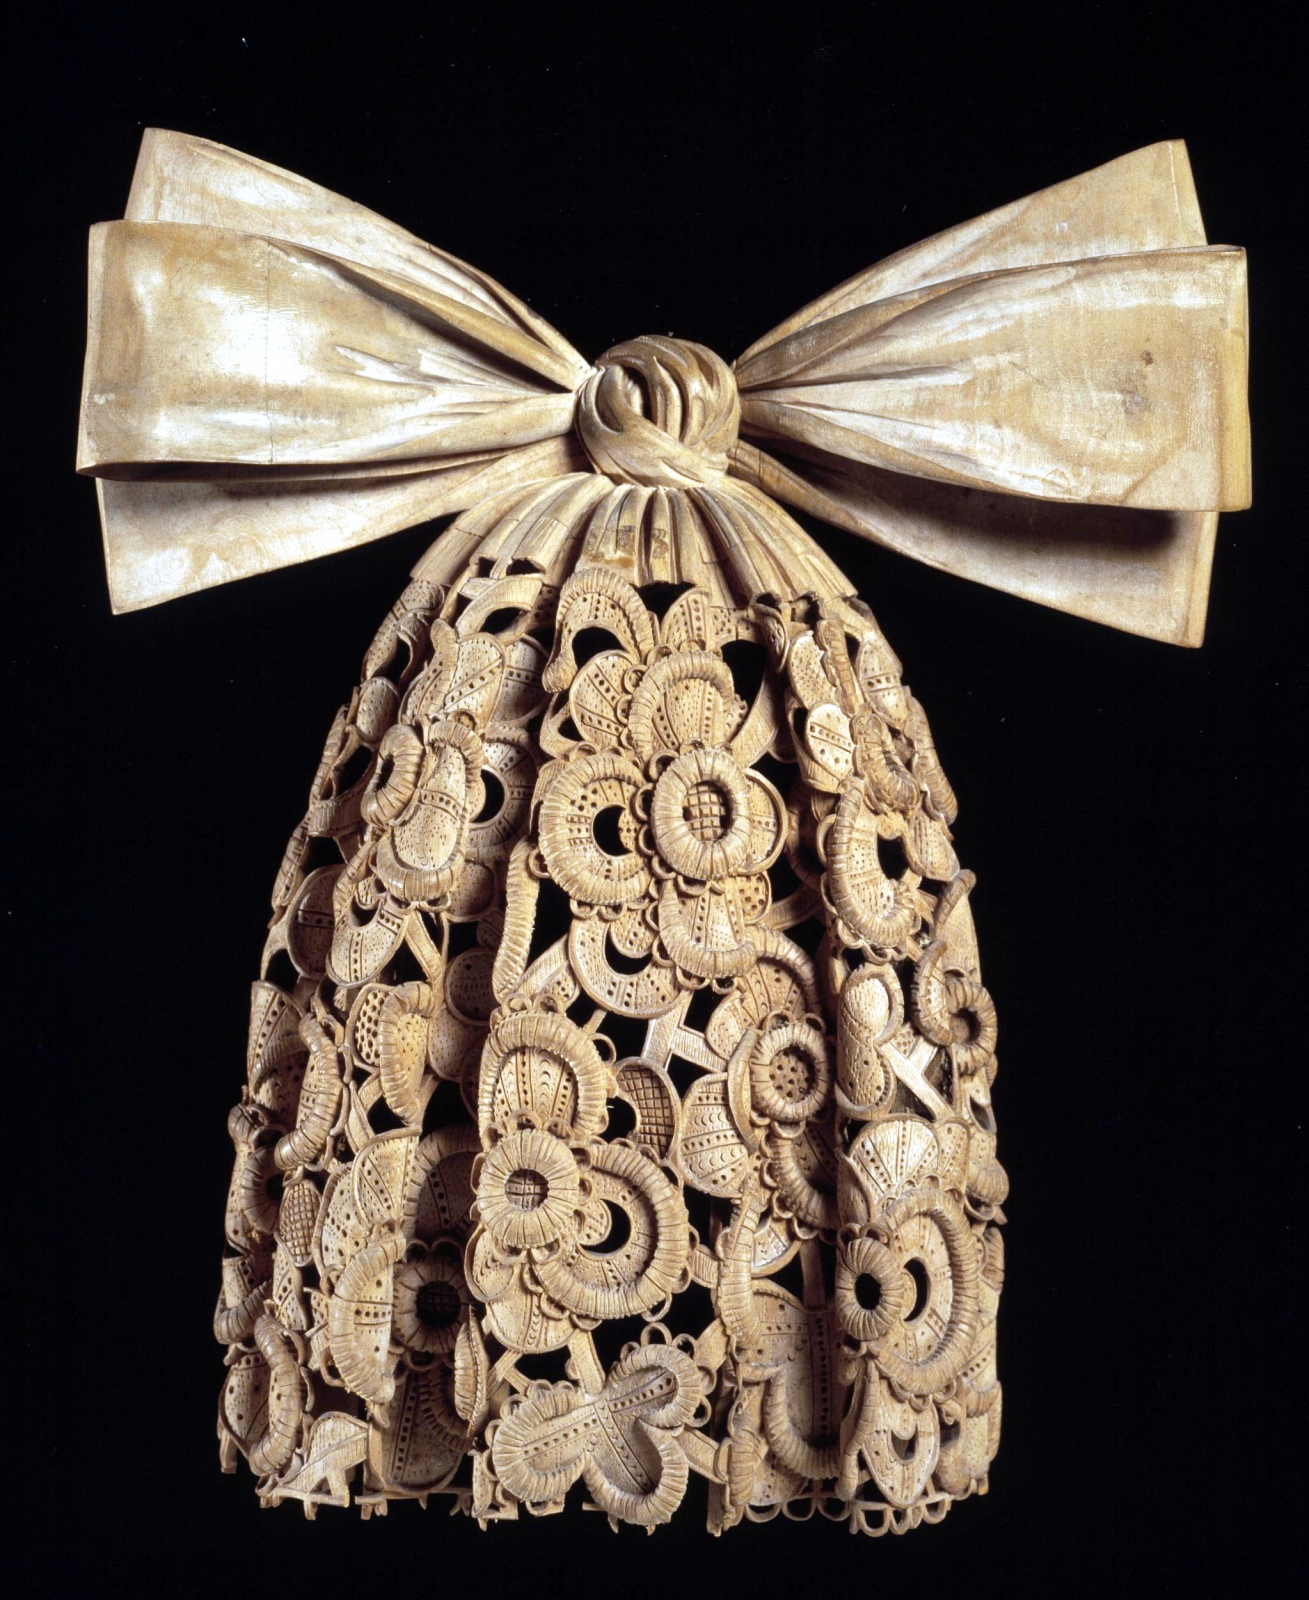 photo of the Point Cravat - with permission from Victoria & Albert Museum